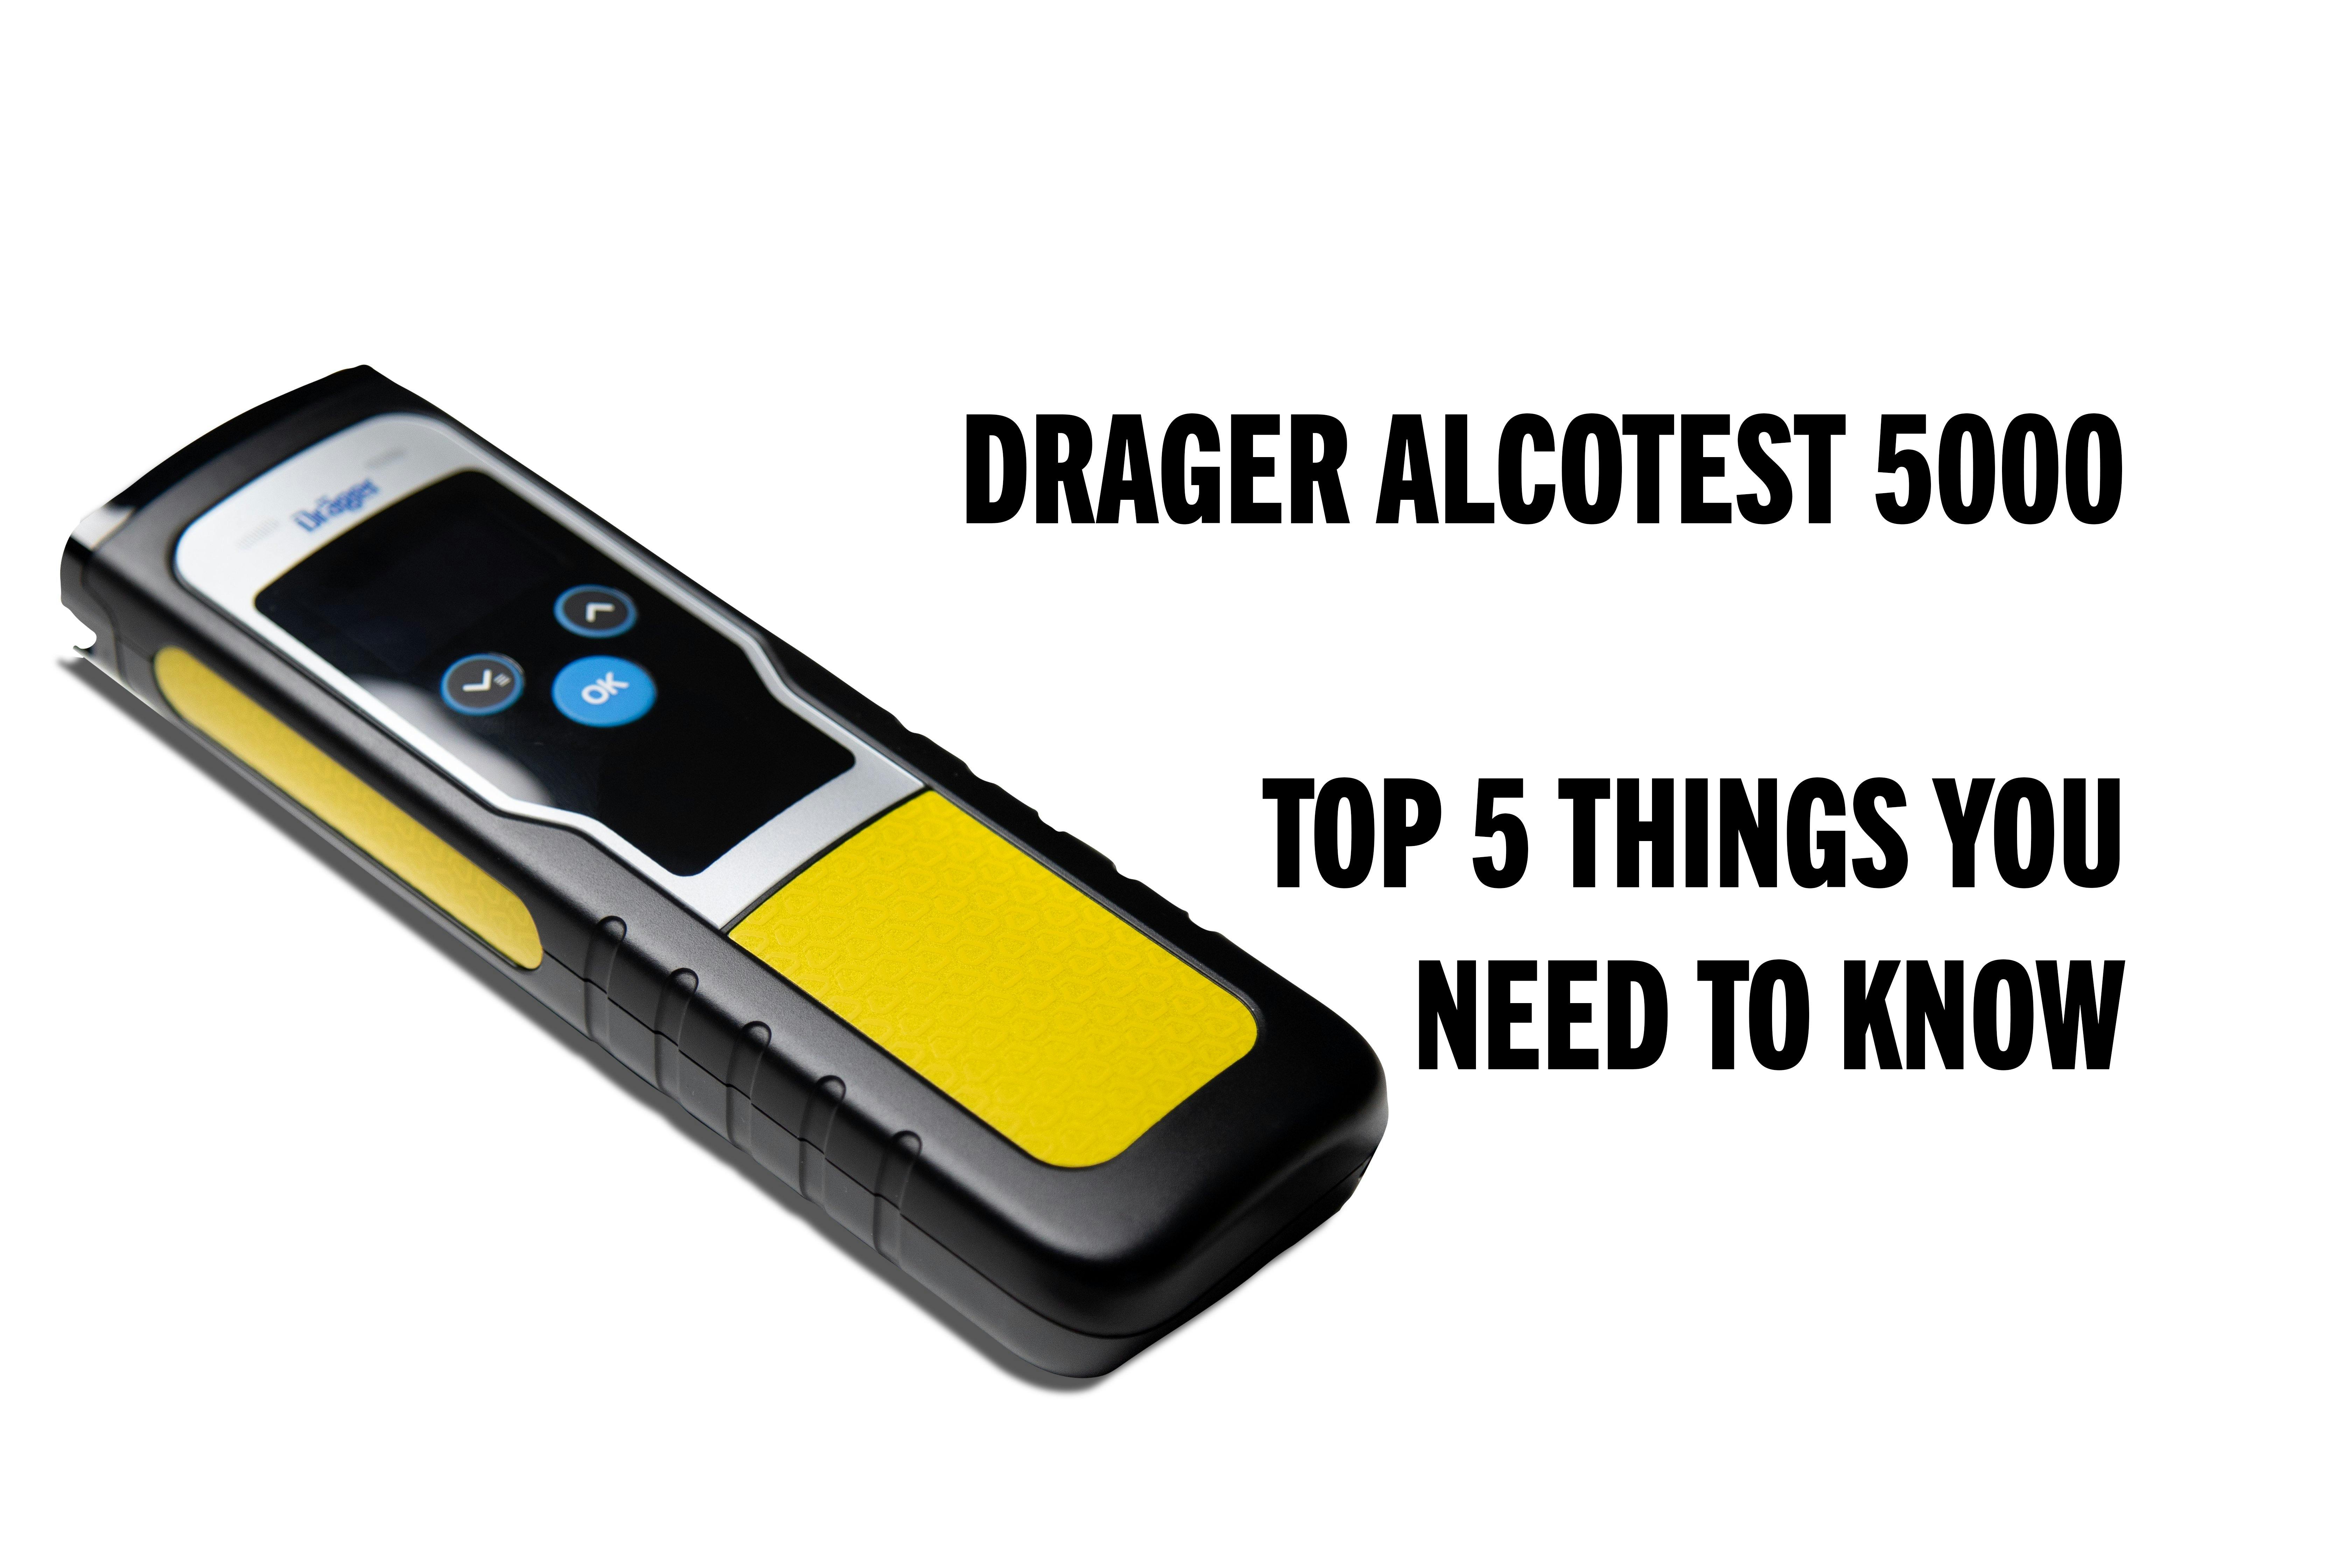 Drager Alcotest 5000 - Top 5 Things You Need to Know